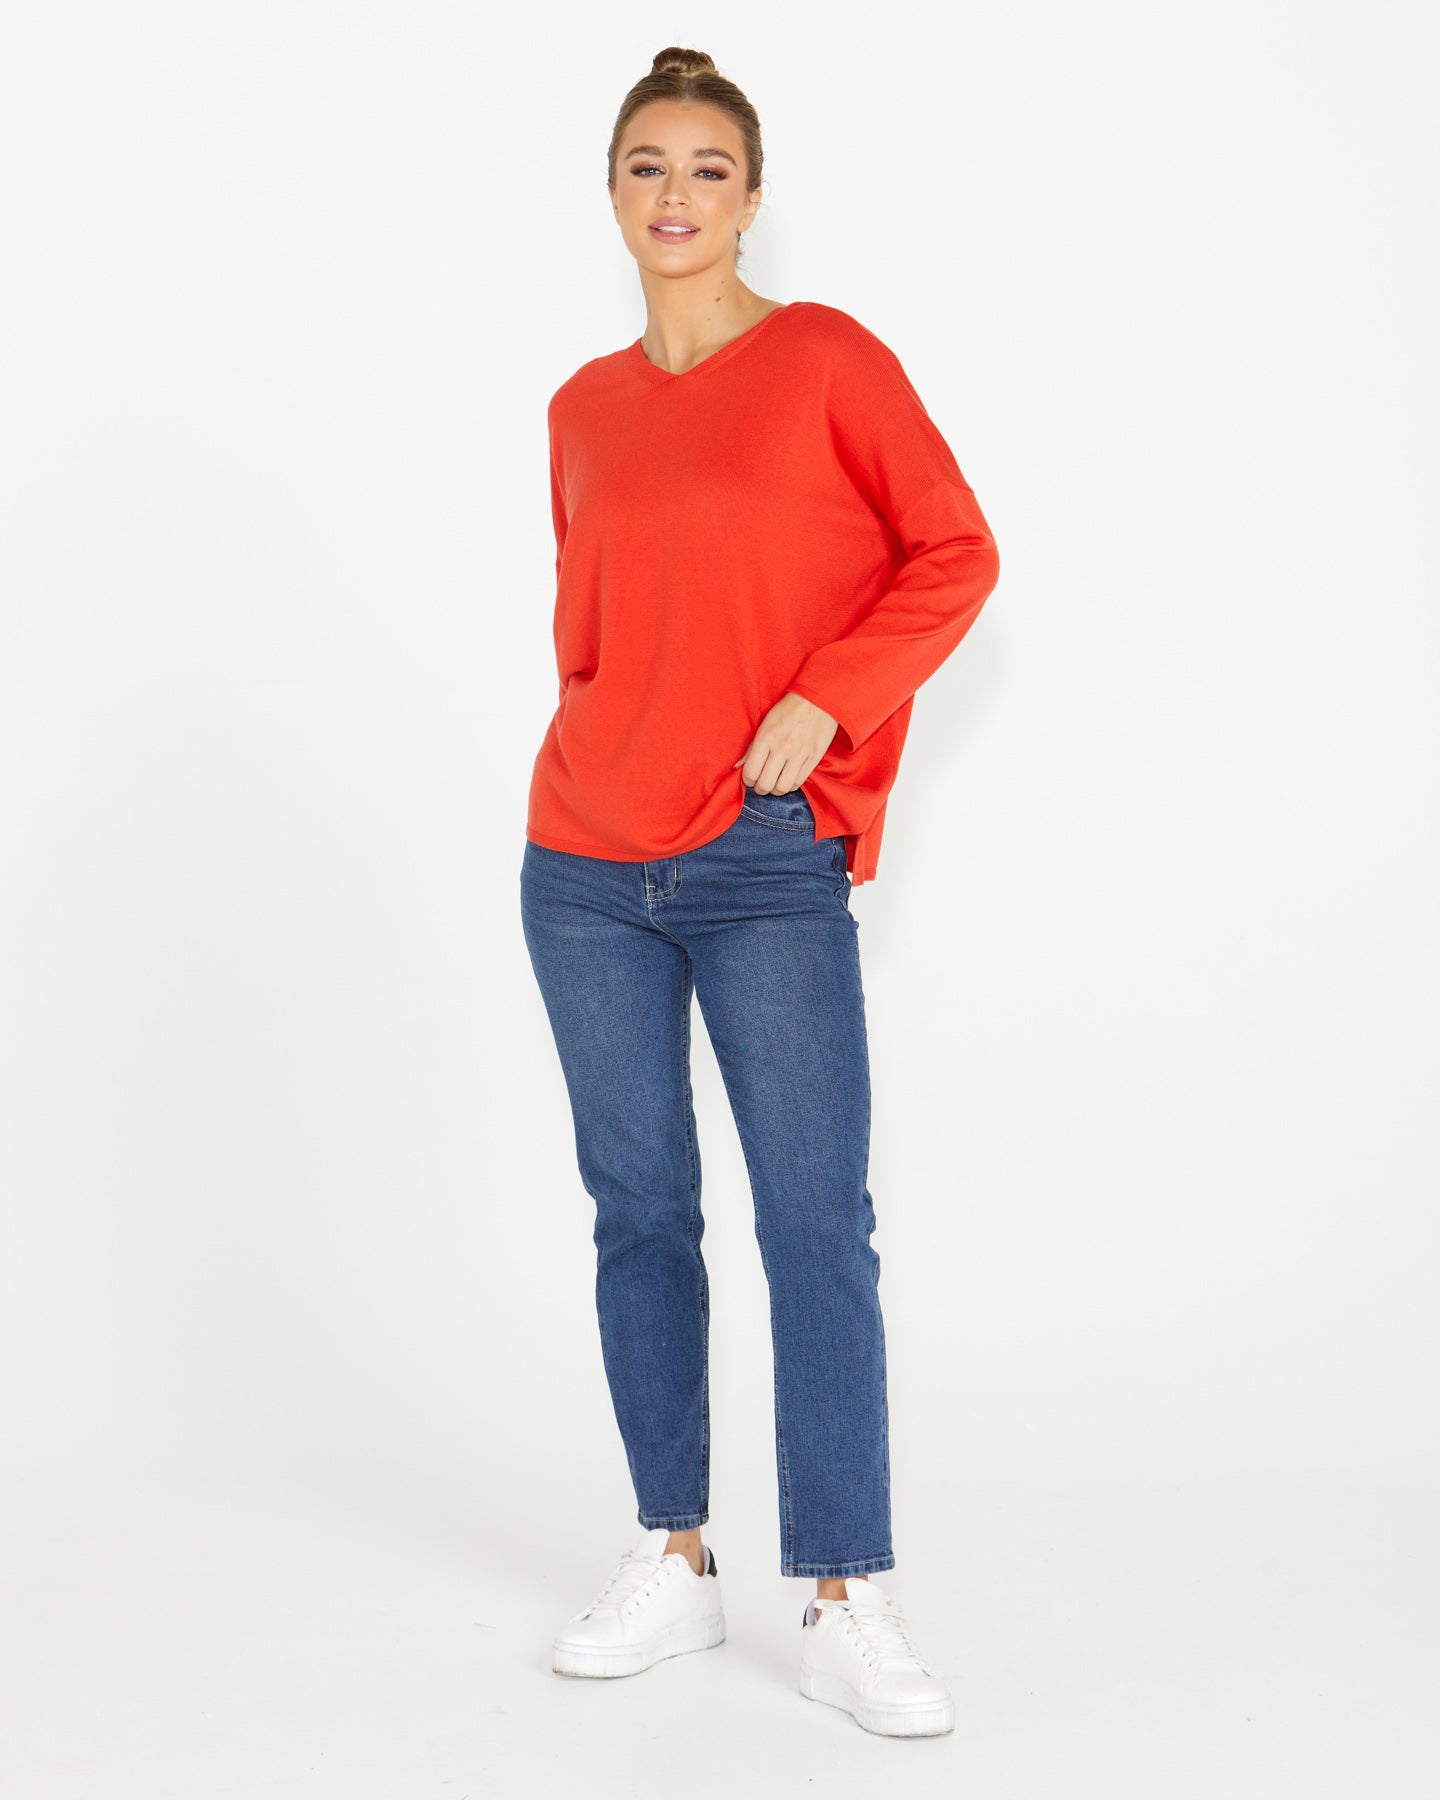 Sass Angelina Reversible Knit - Red